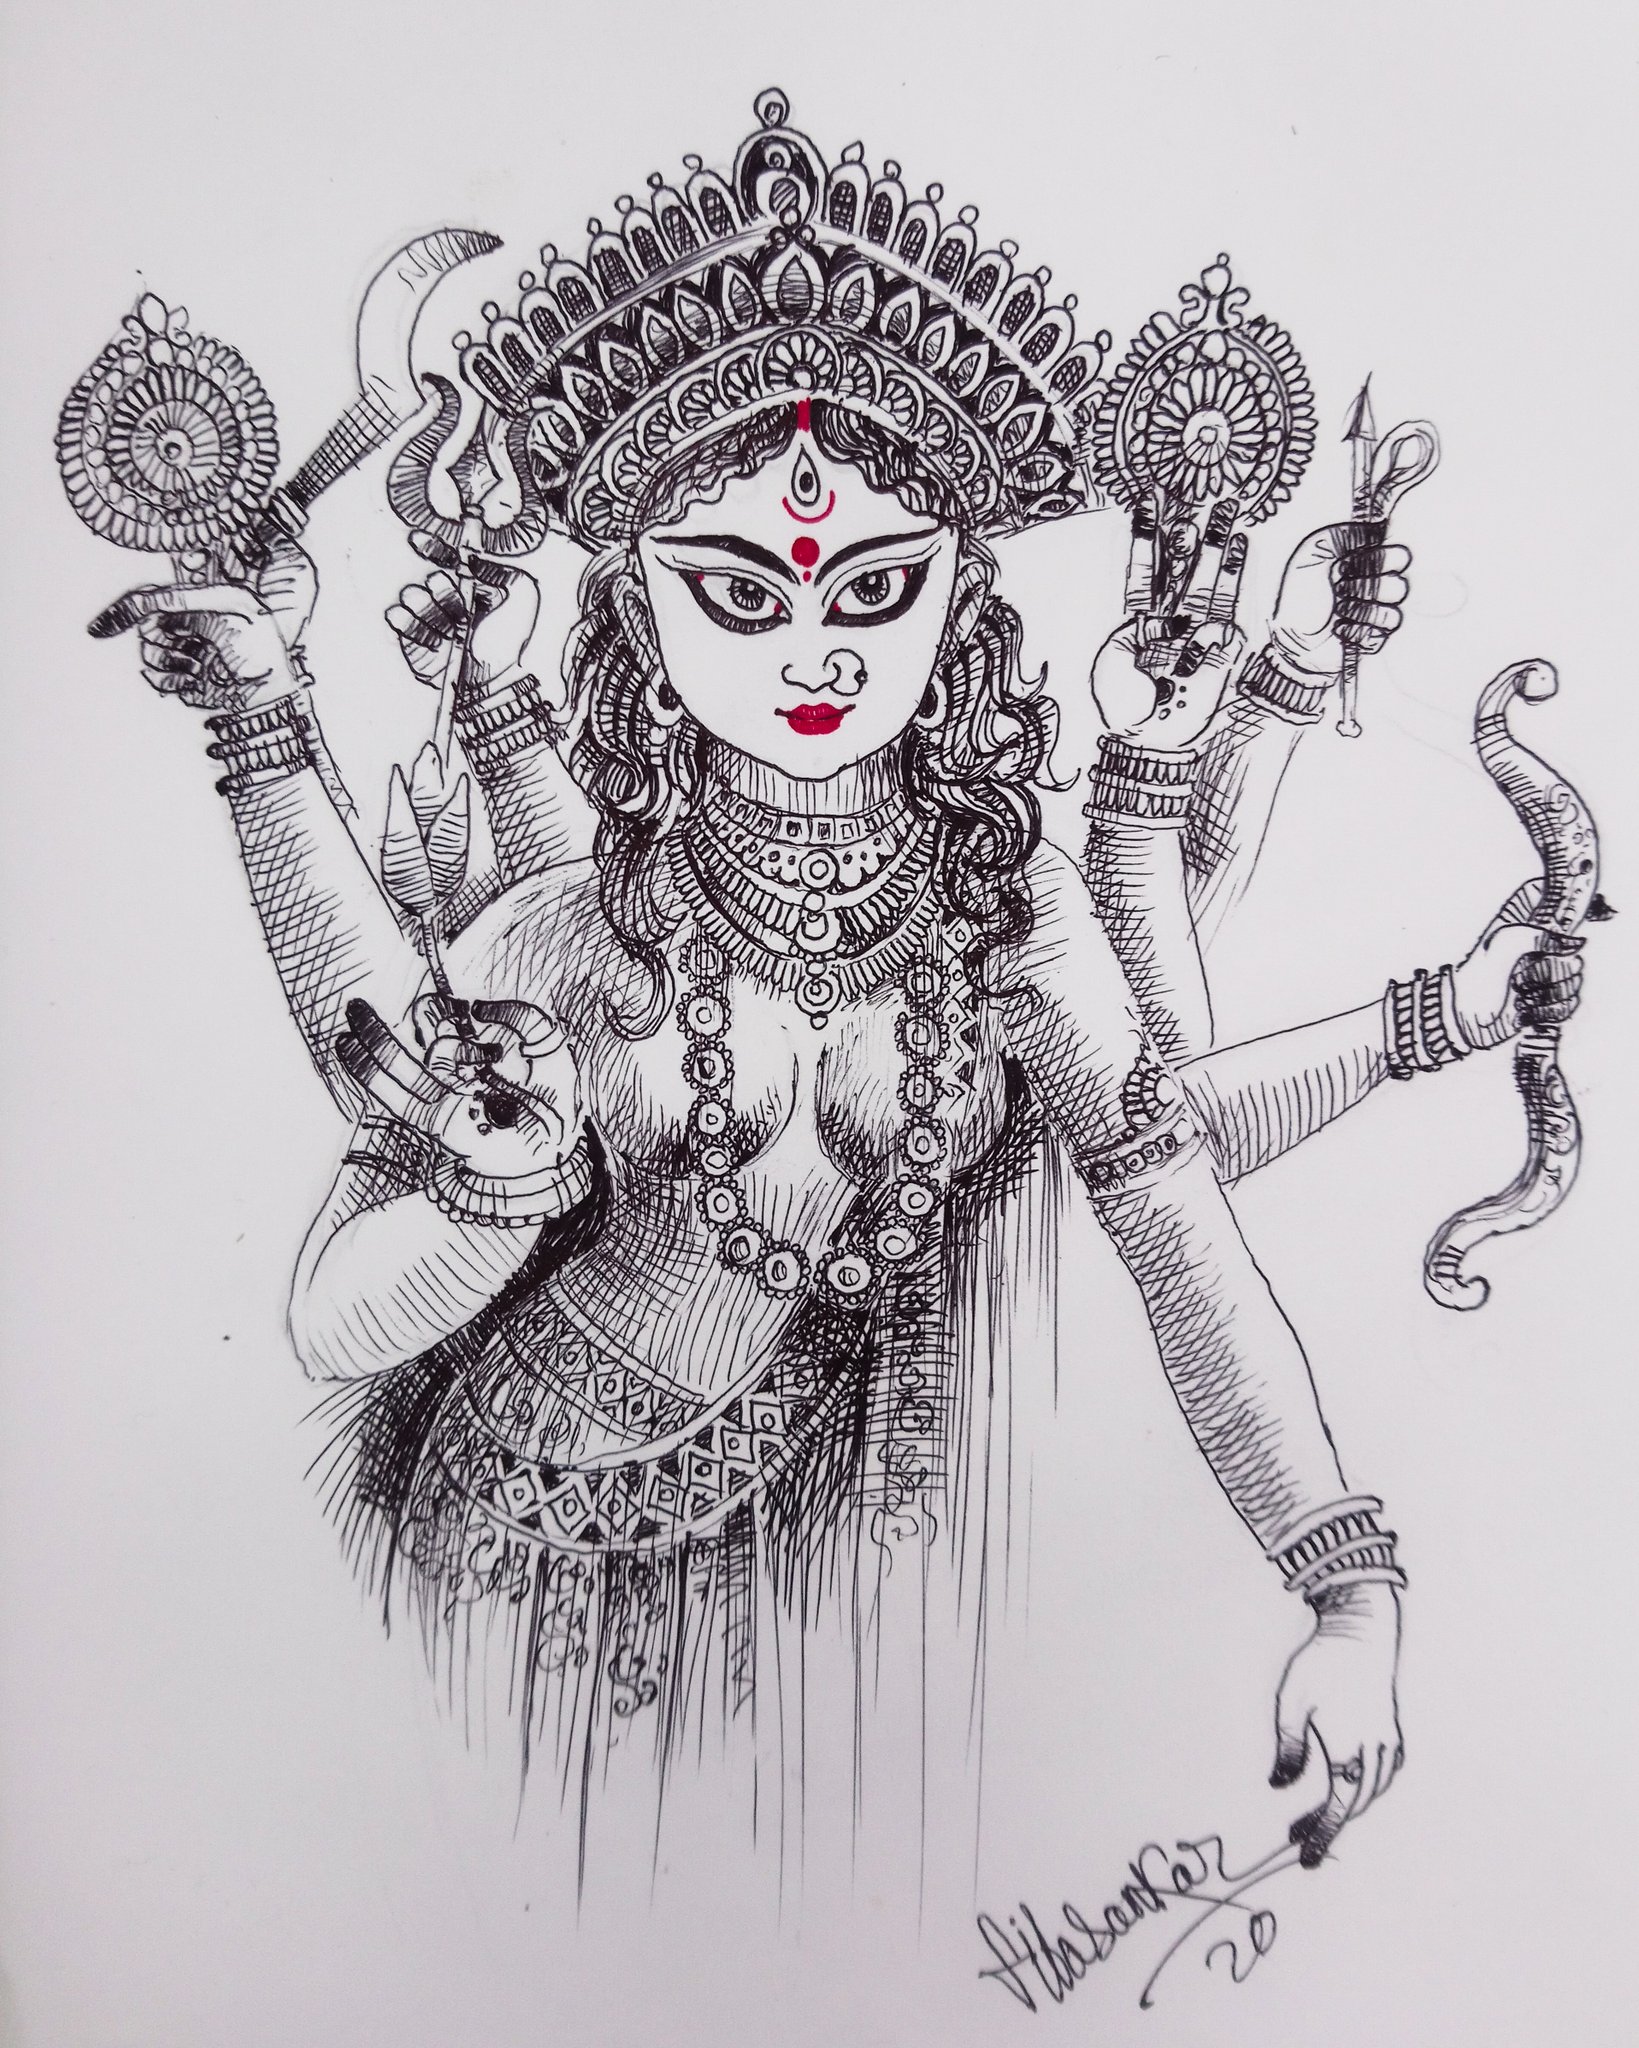 5 Inspiring Maa Durga Pencil Sketches to Add to Your Collection